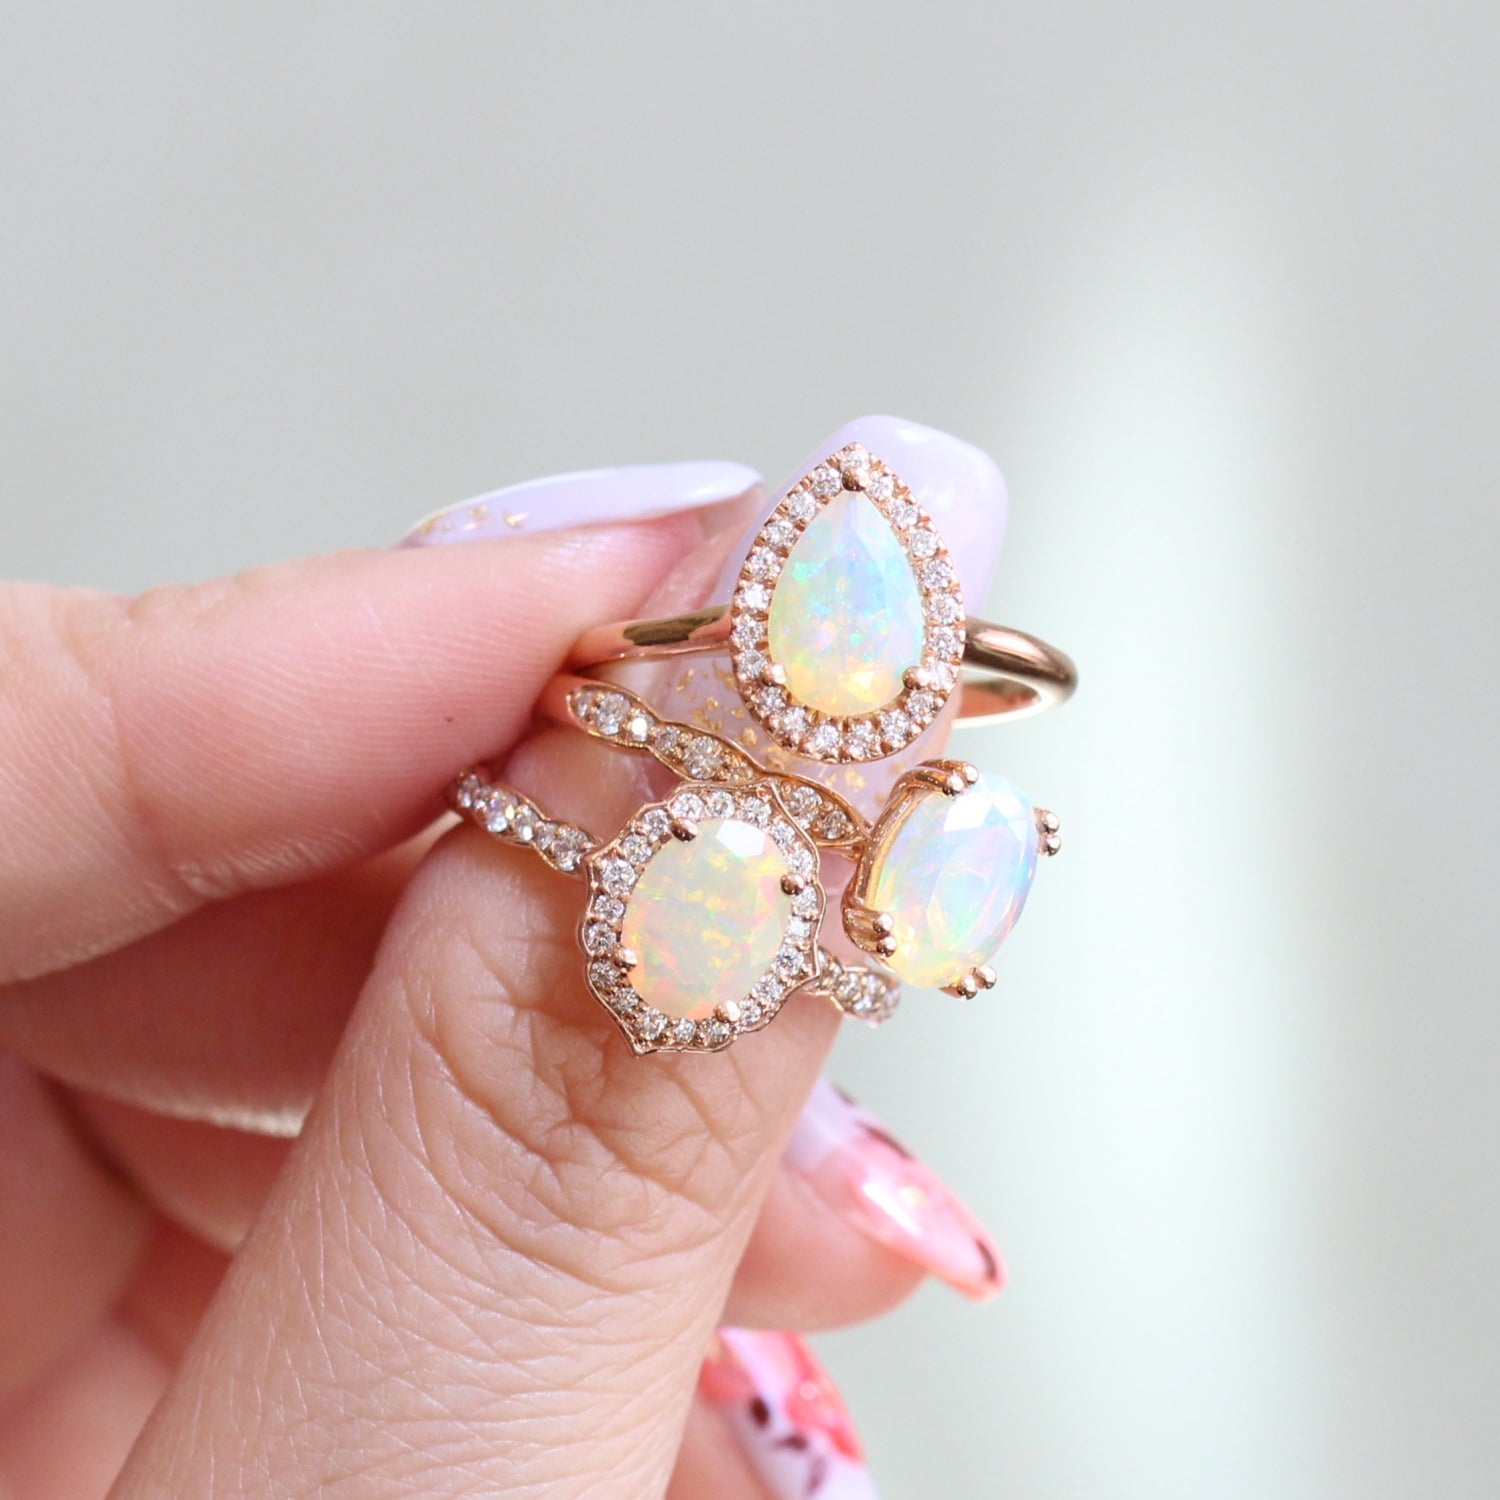 opal engagement rings in rose gold with diamond wedding band set by La More Design Jewelry